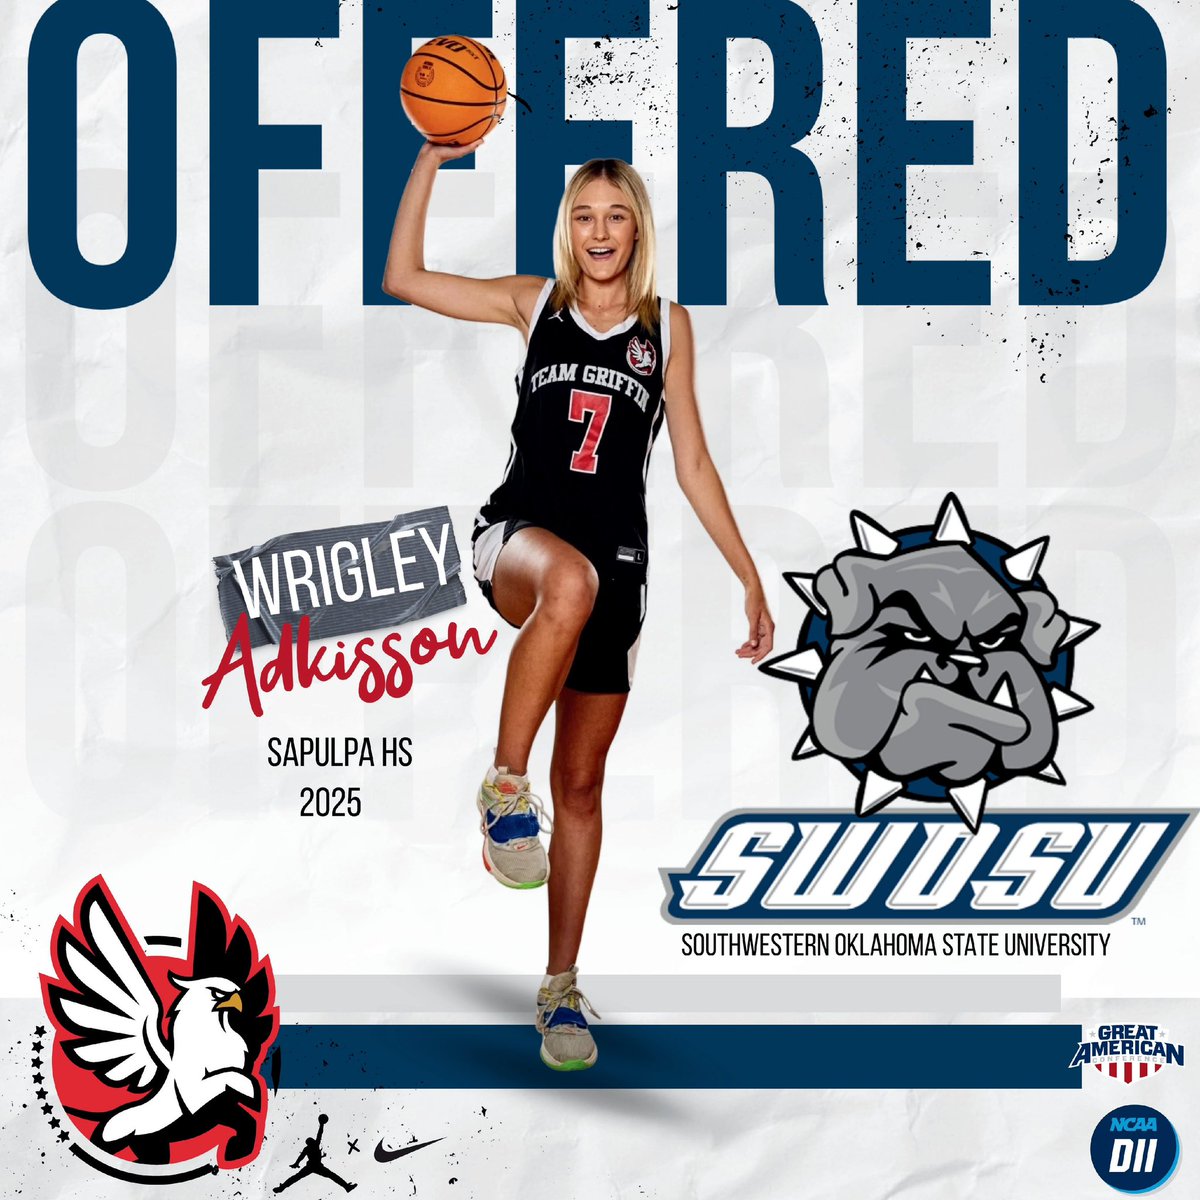 Congratulations to 2025 @AdkissonWrigley on receiving an offer from @SWOSUW! 🦅 @okmagiccoach